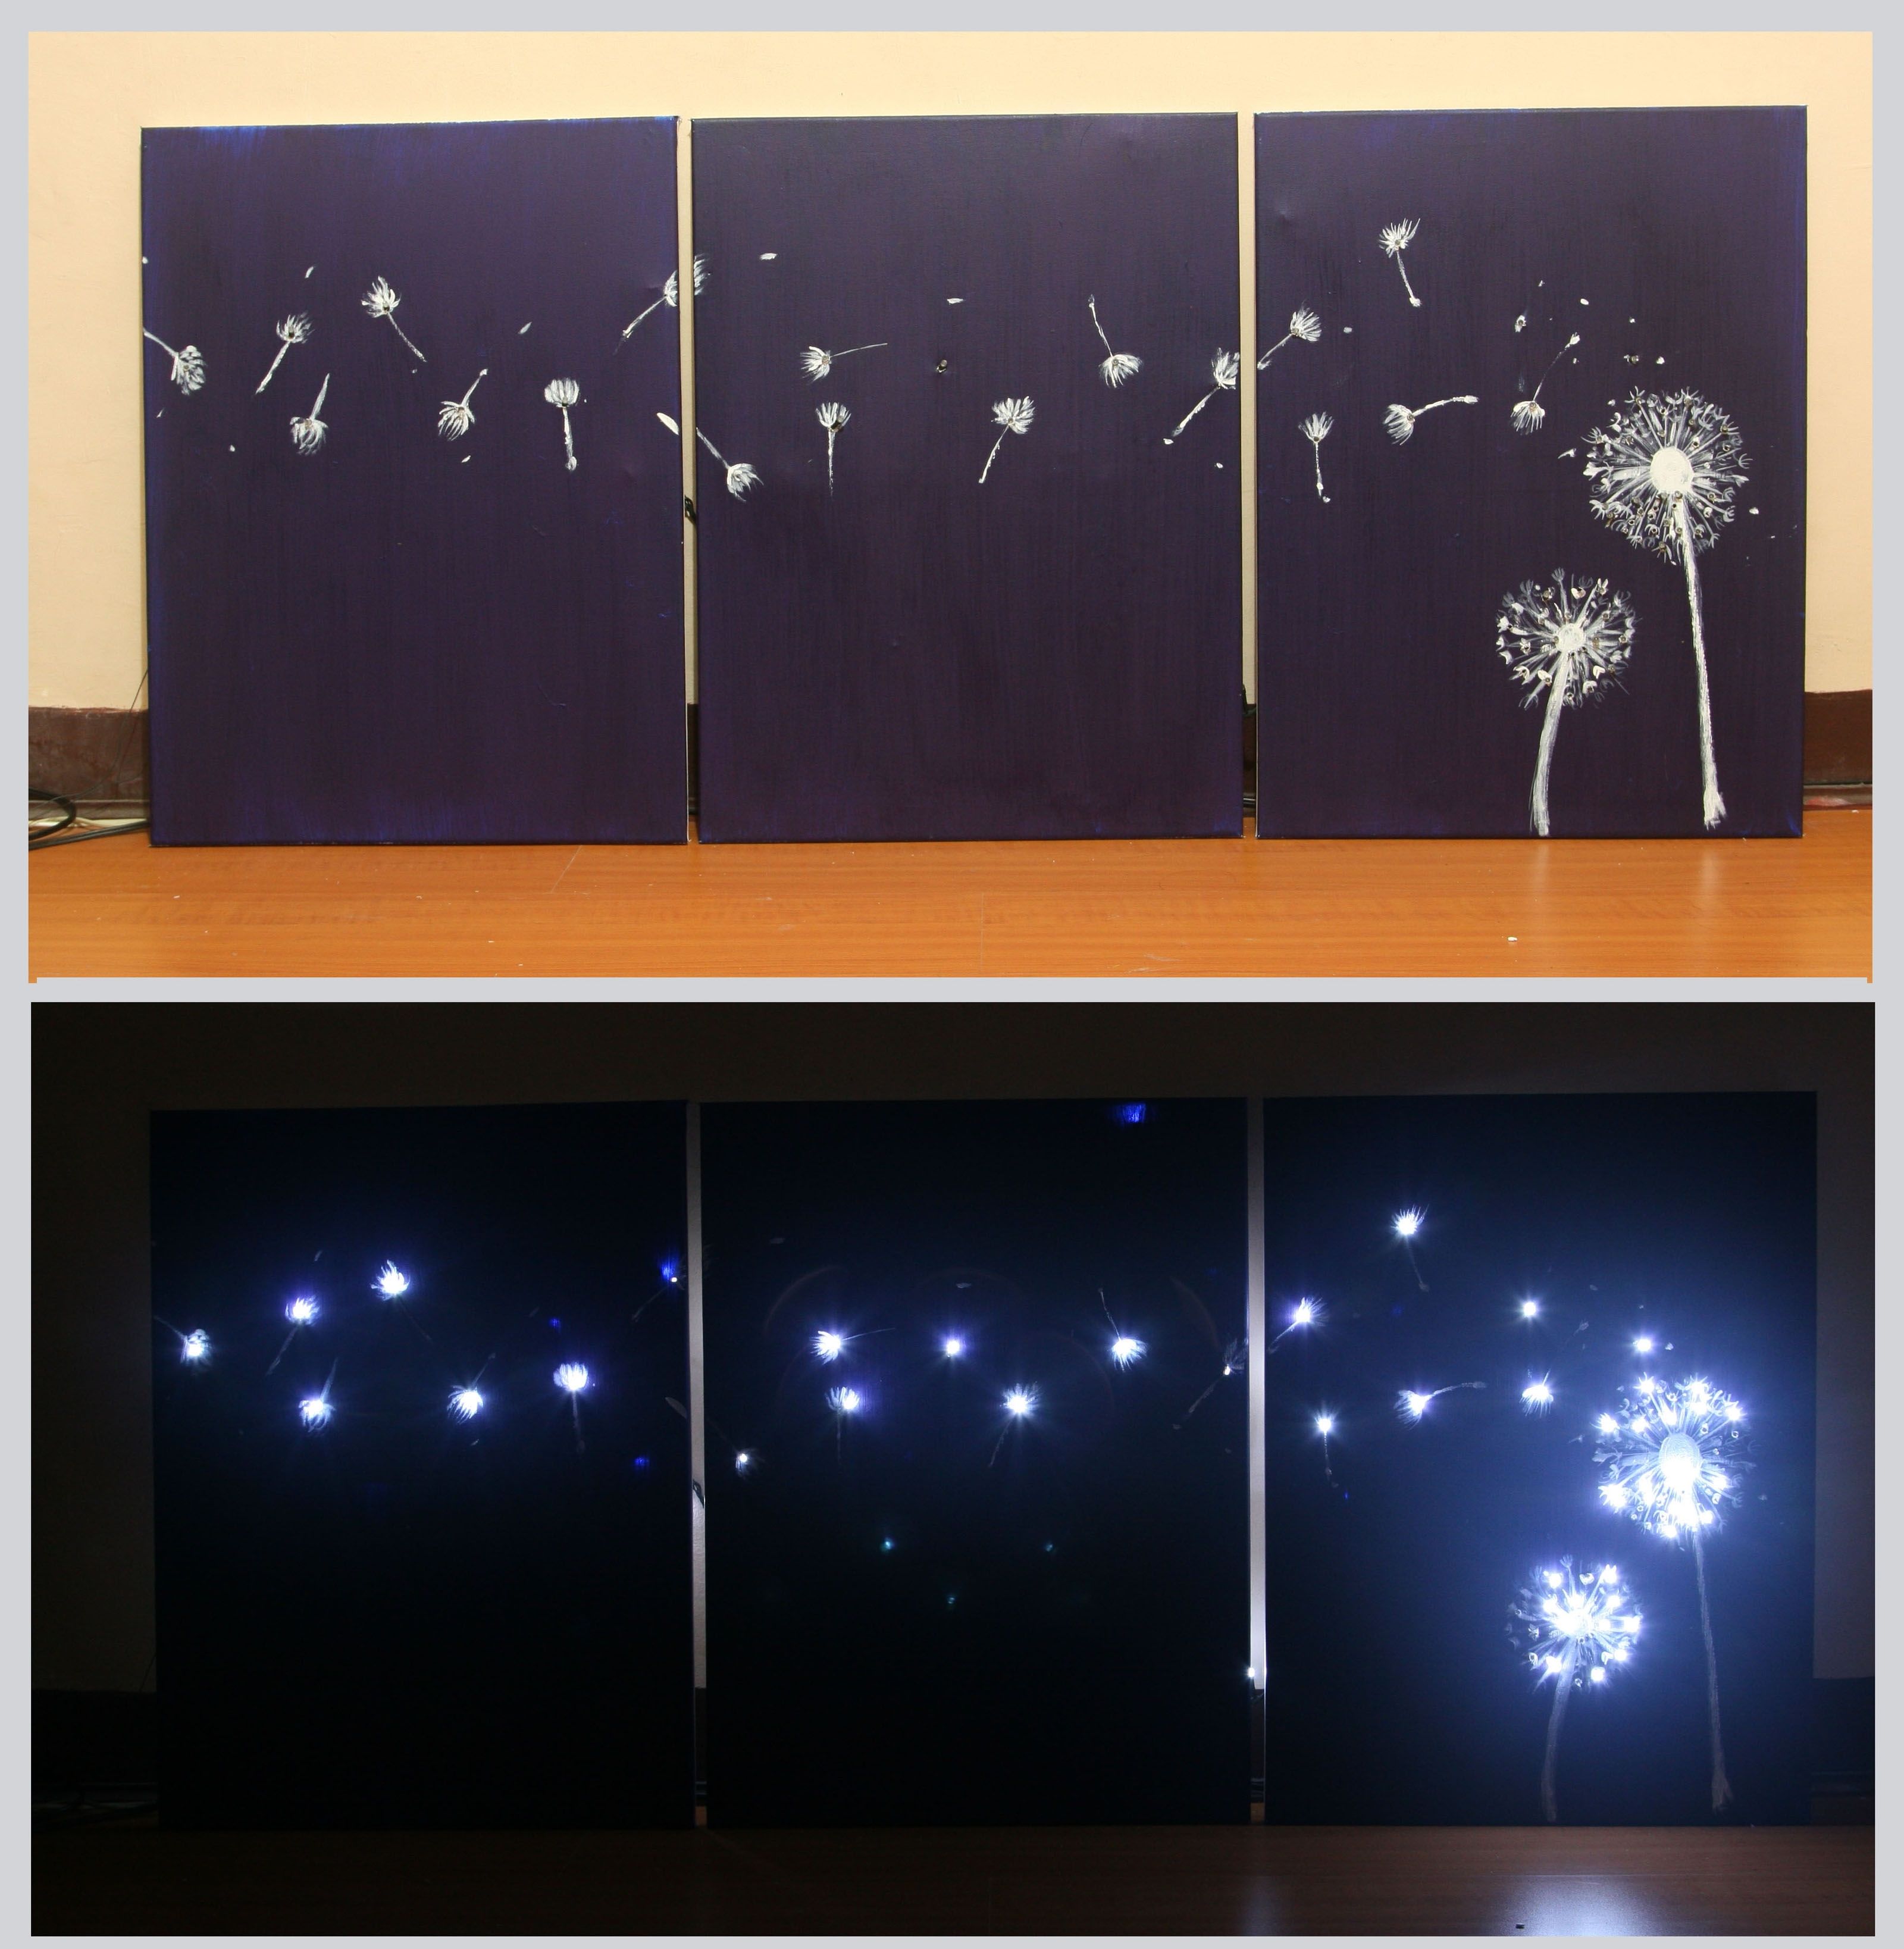 Light Up Wall Art Within 2018 3 Ways To Design Three Panel, Light Up Dandelion Wall Art (View 1 of 20)